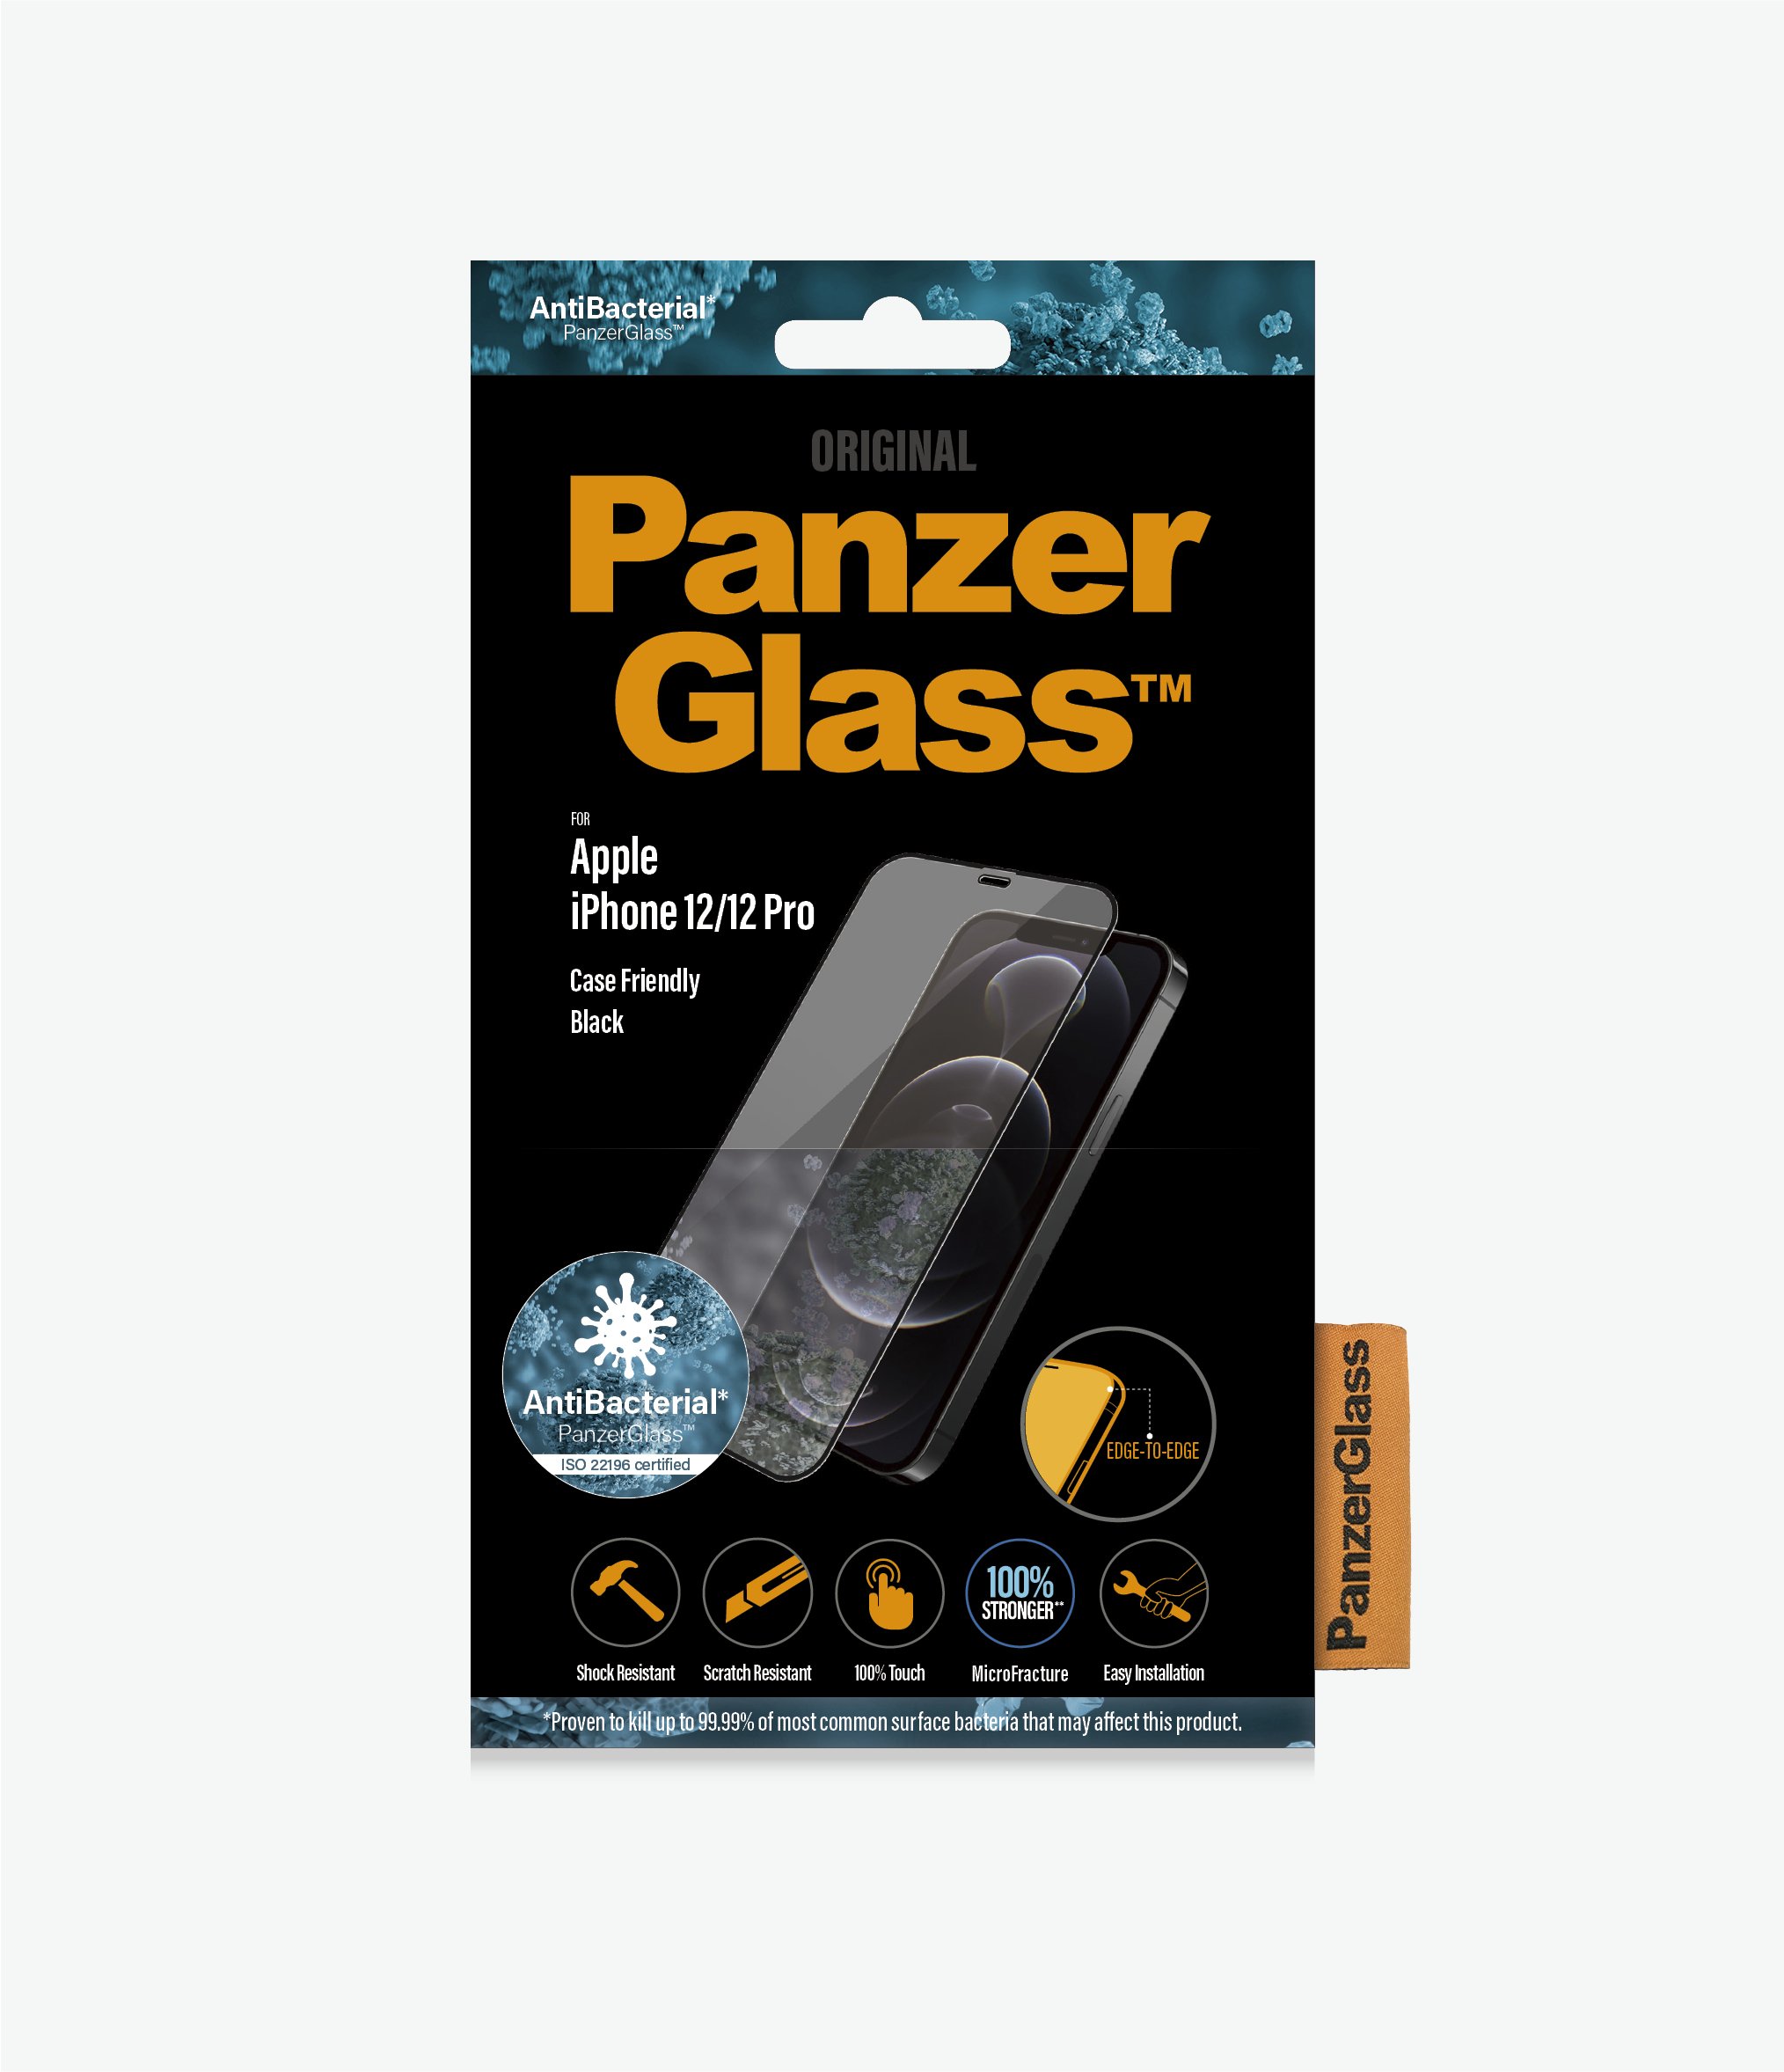 PanzerGlass™ Apple  iPhone 12/12 Pro - Black (2711) - Screen Protector -  Scratch resistance, Crystal clear, Shock absorbing, Antibacterial glass